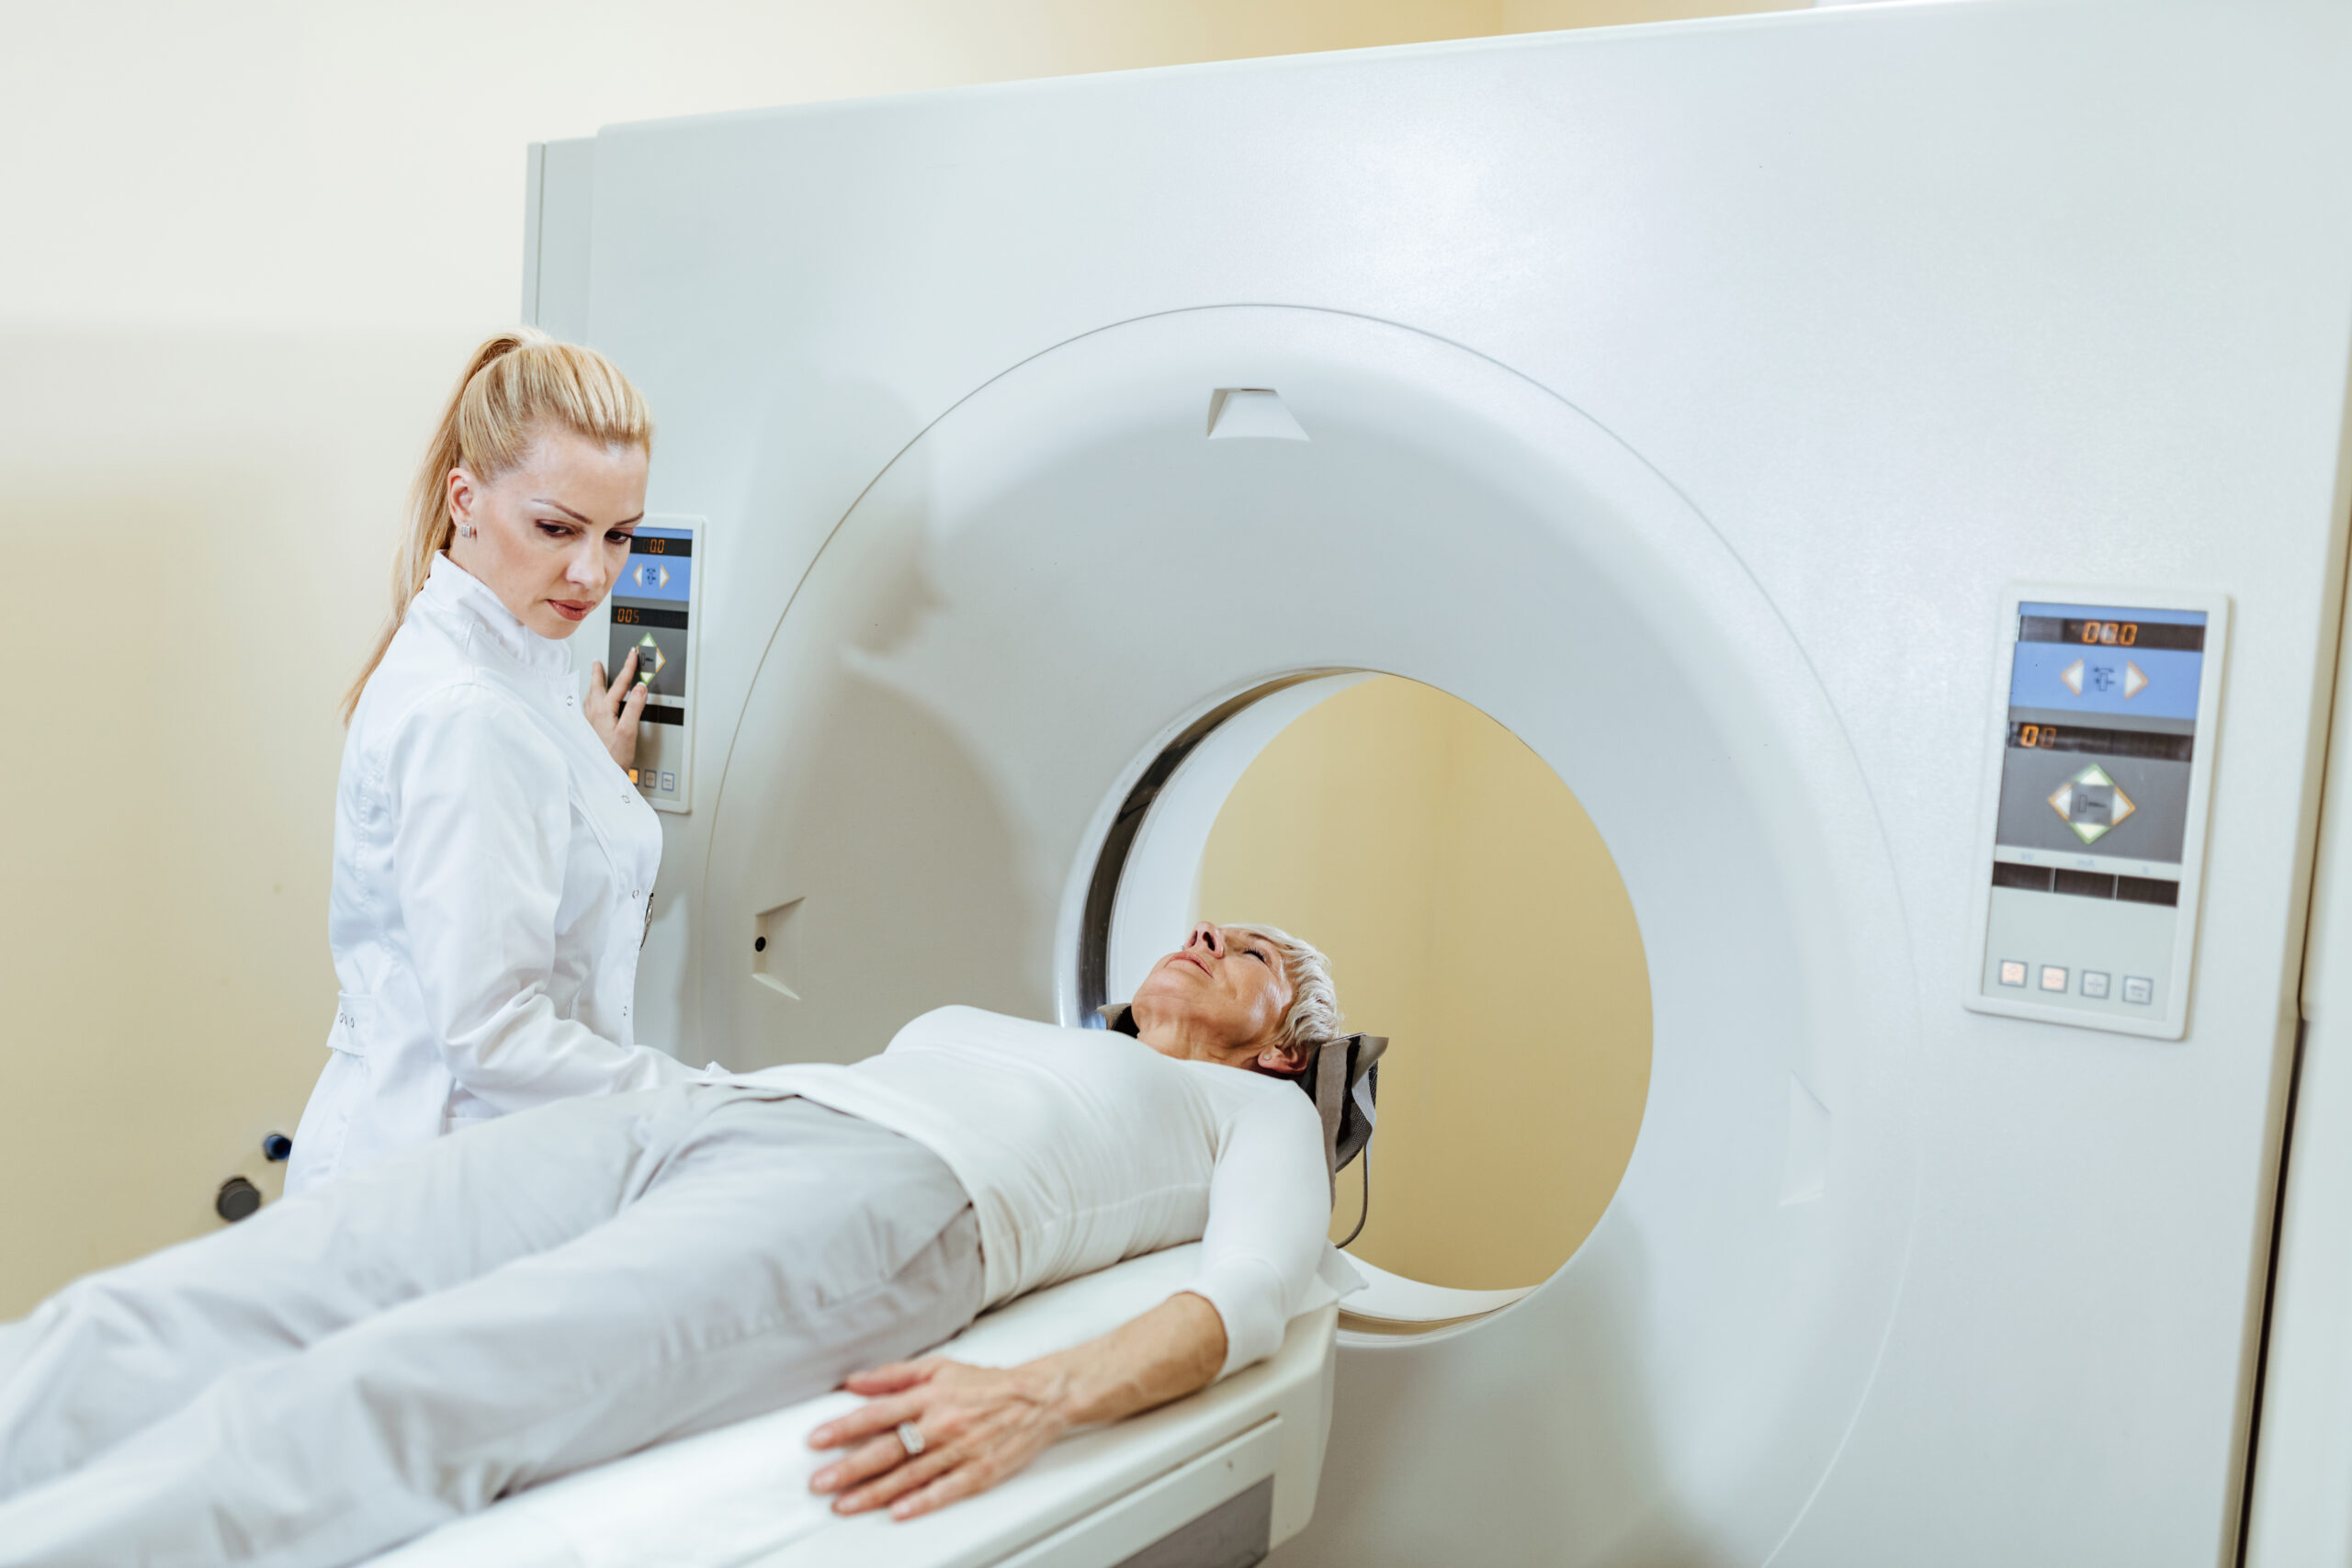 Female medical technician and mature patient during CT scan procedure in examination room at the hospital.